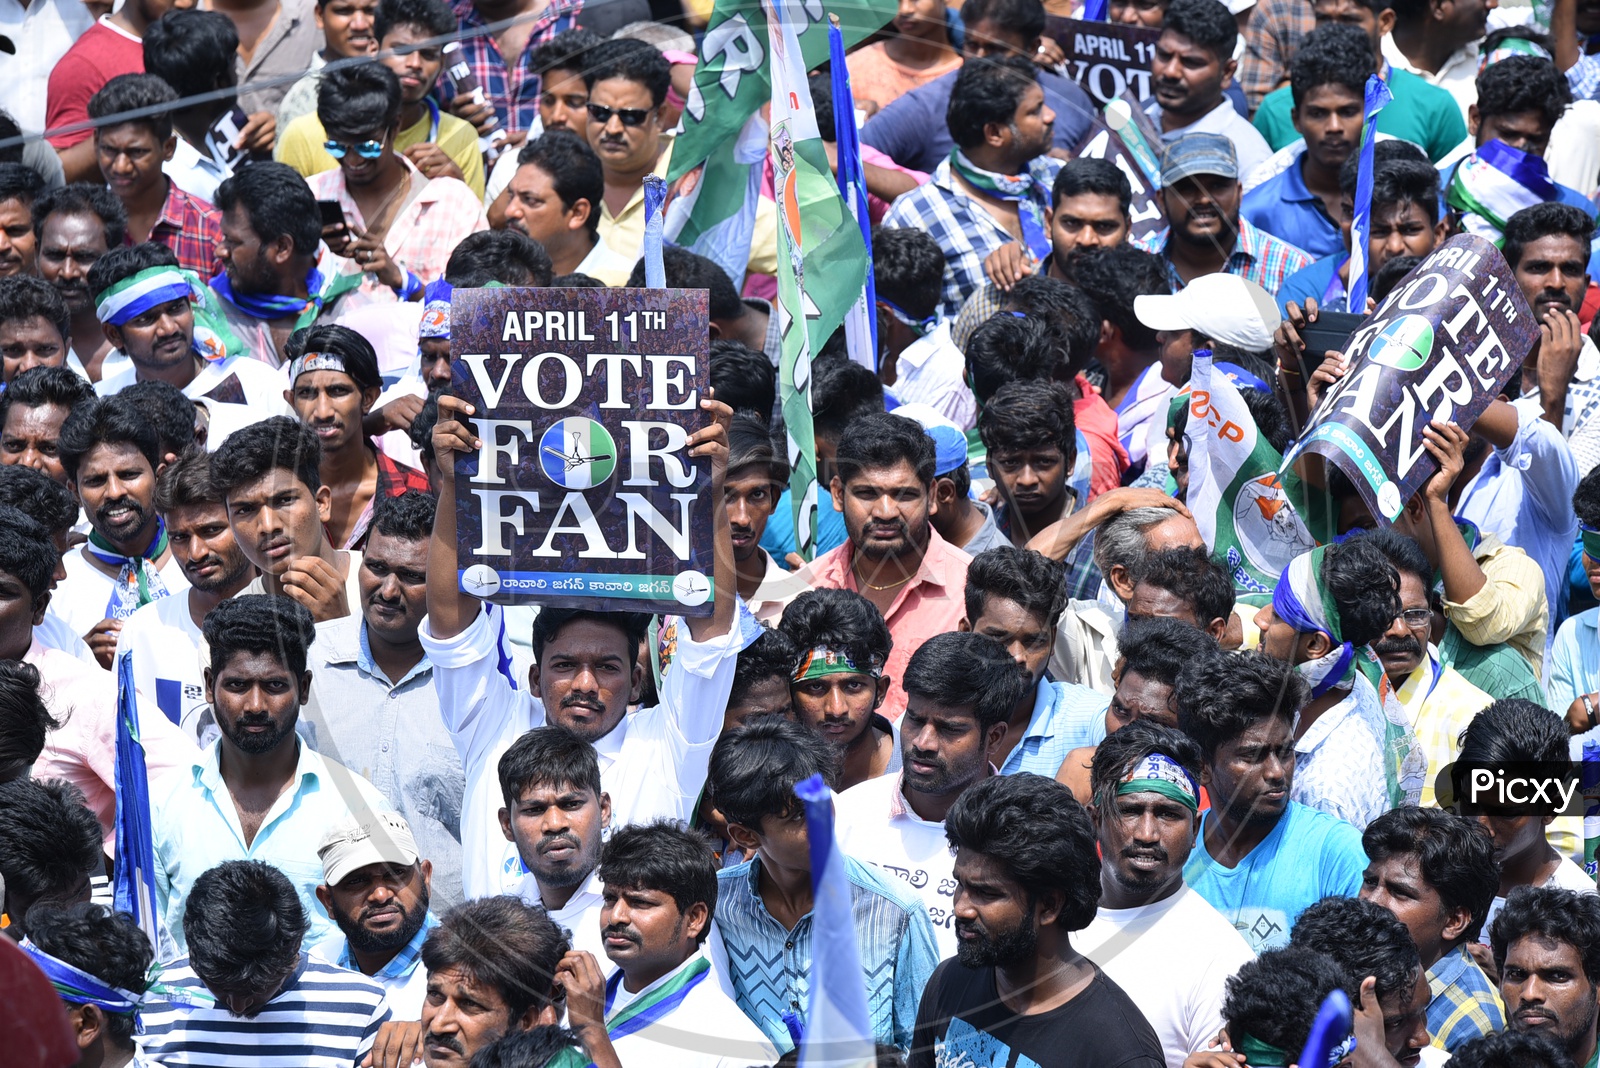 YSRCP Party Supporters With Vote For Jagan Placards During Election Campaign Rally